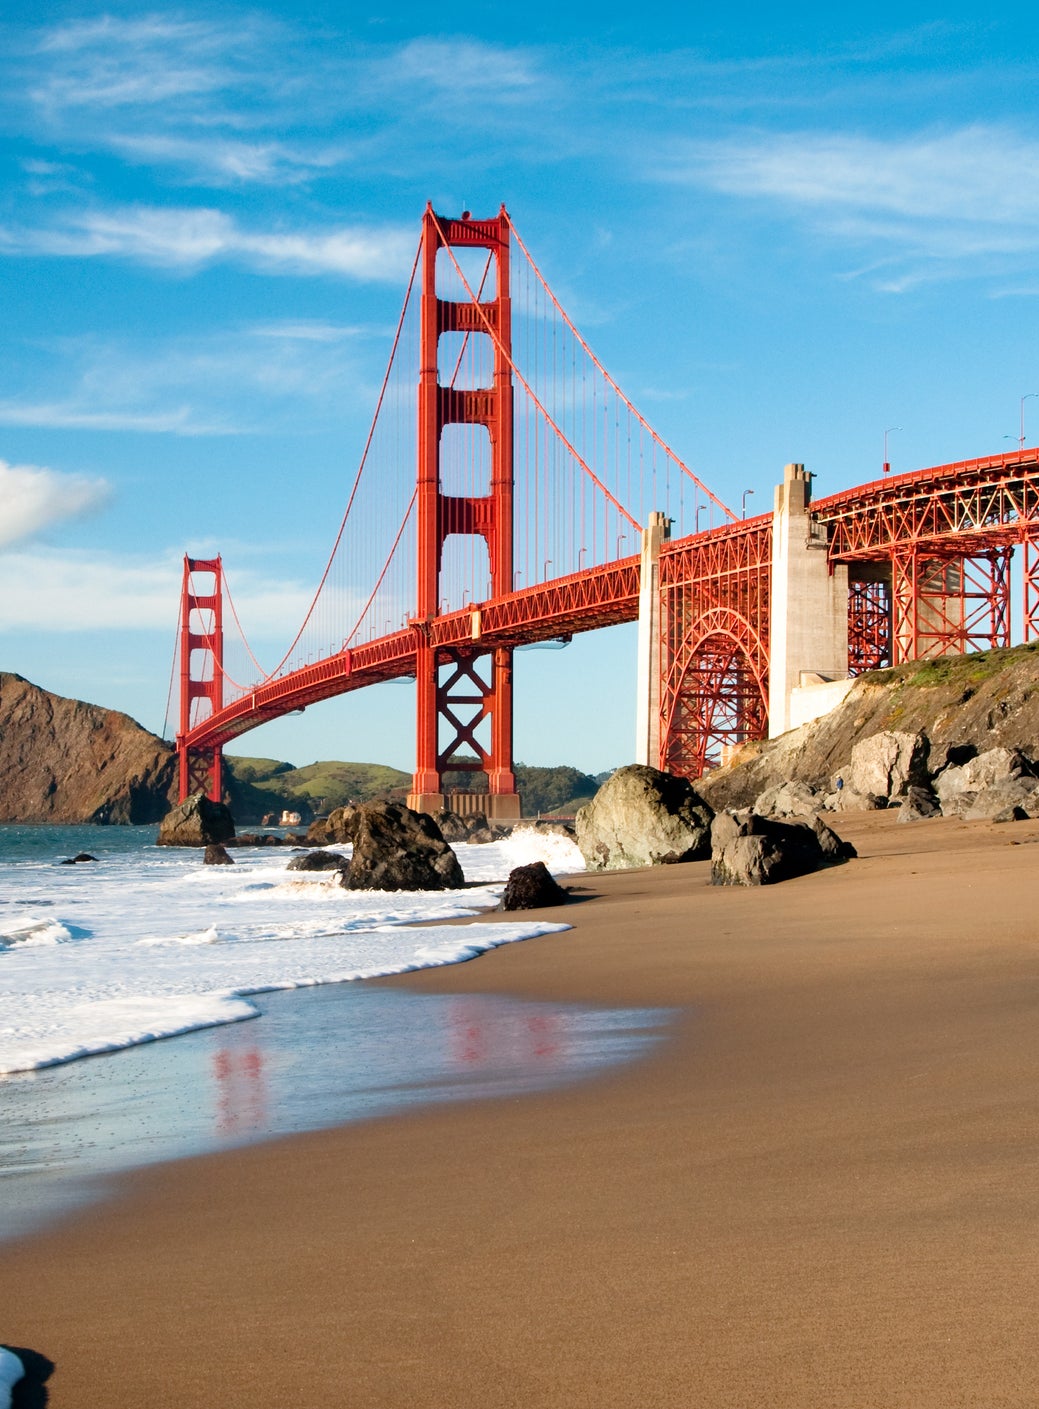 Golden Gate Bridge viewed from a sandy beach with waves in the foreground